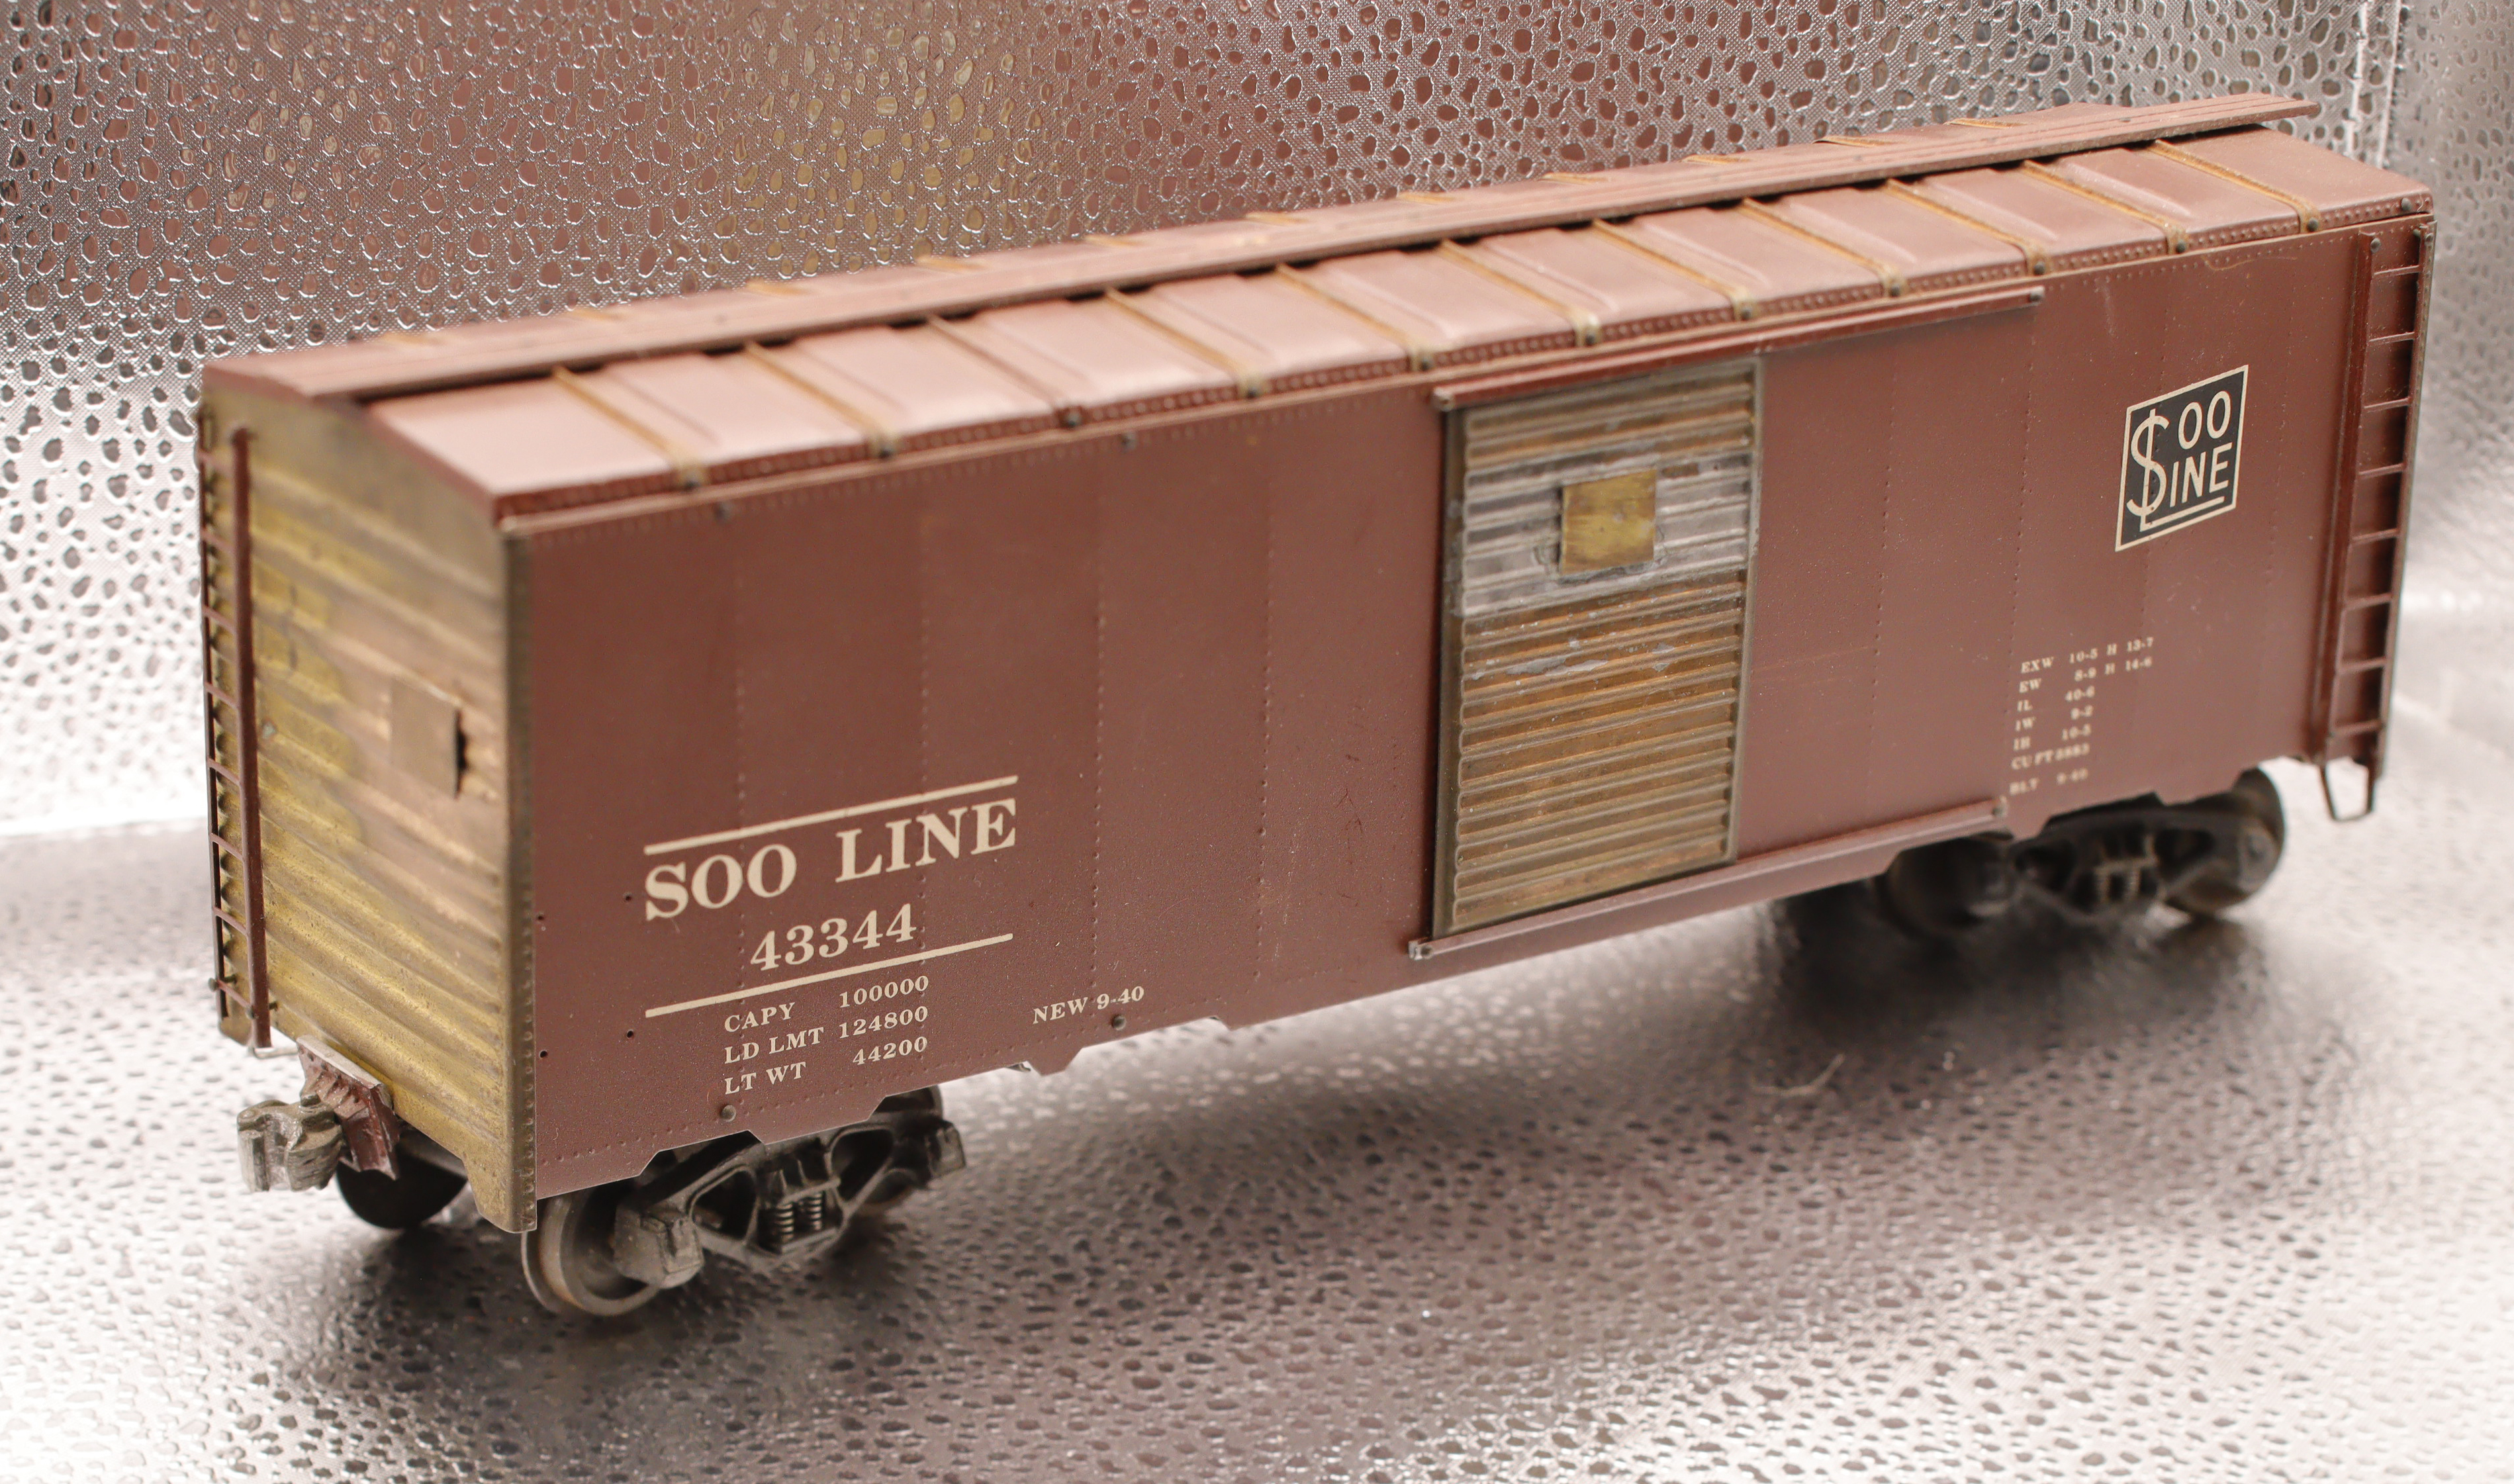 1st view of the unbranded Soo Line Boxcar #43344 in my O-scale Collection